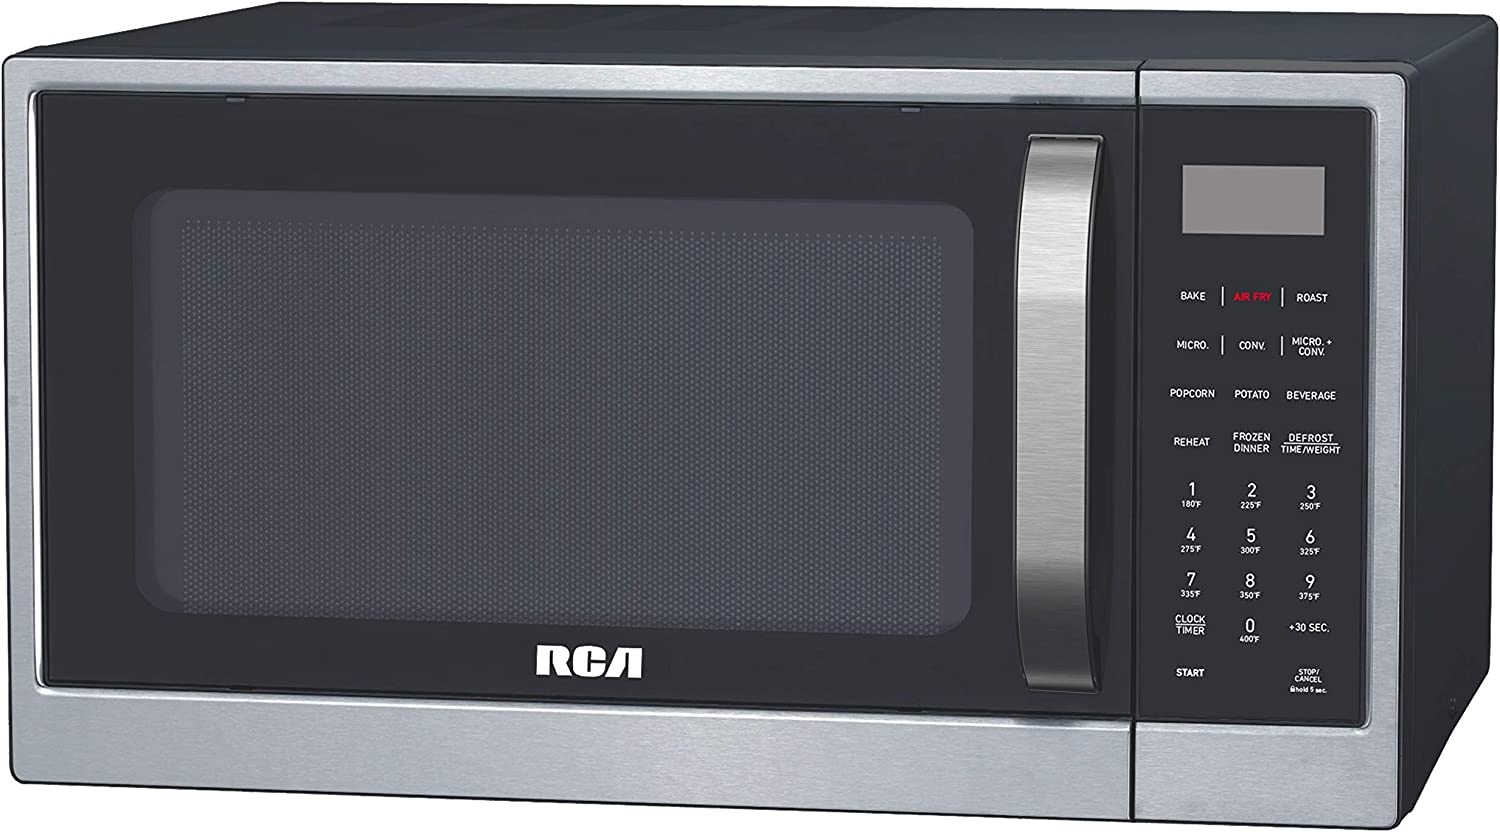 RCA RMW1205 1.2 cu ft Microwave, Digital Air Fryer, Convection Oven, Combo-Fry with XL Capacity, Stainless Steel Finish Import